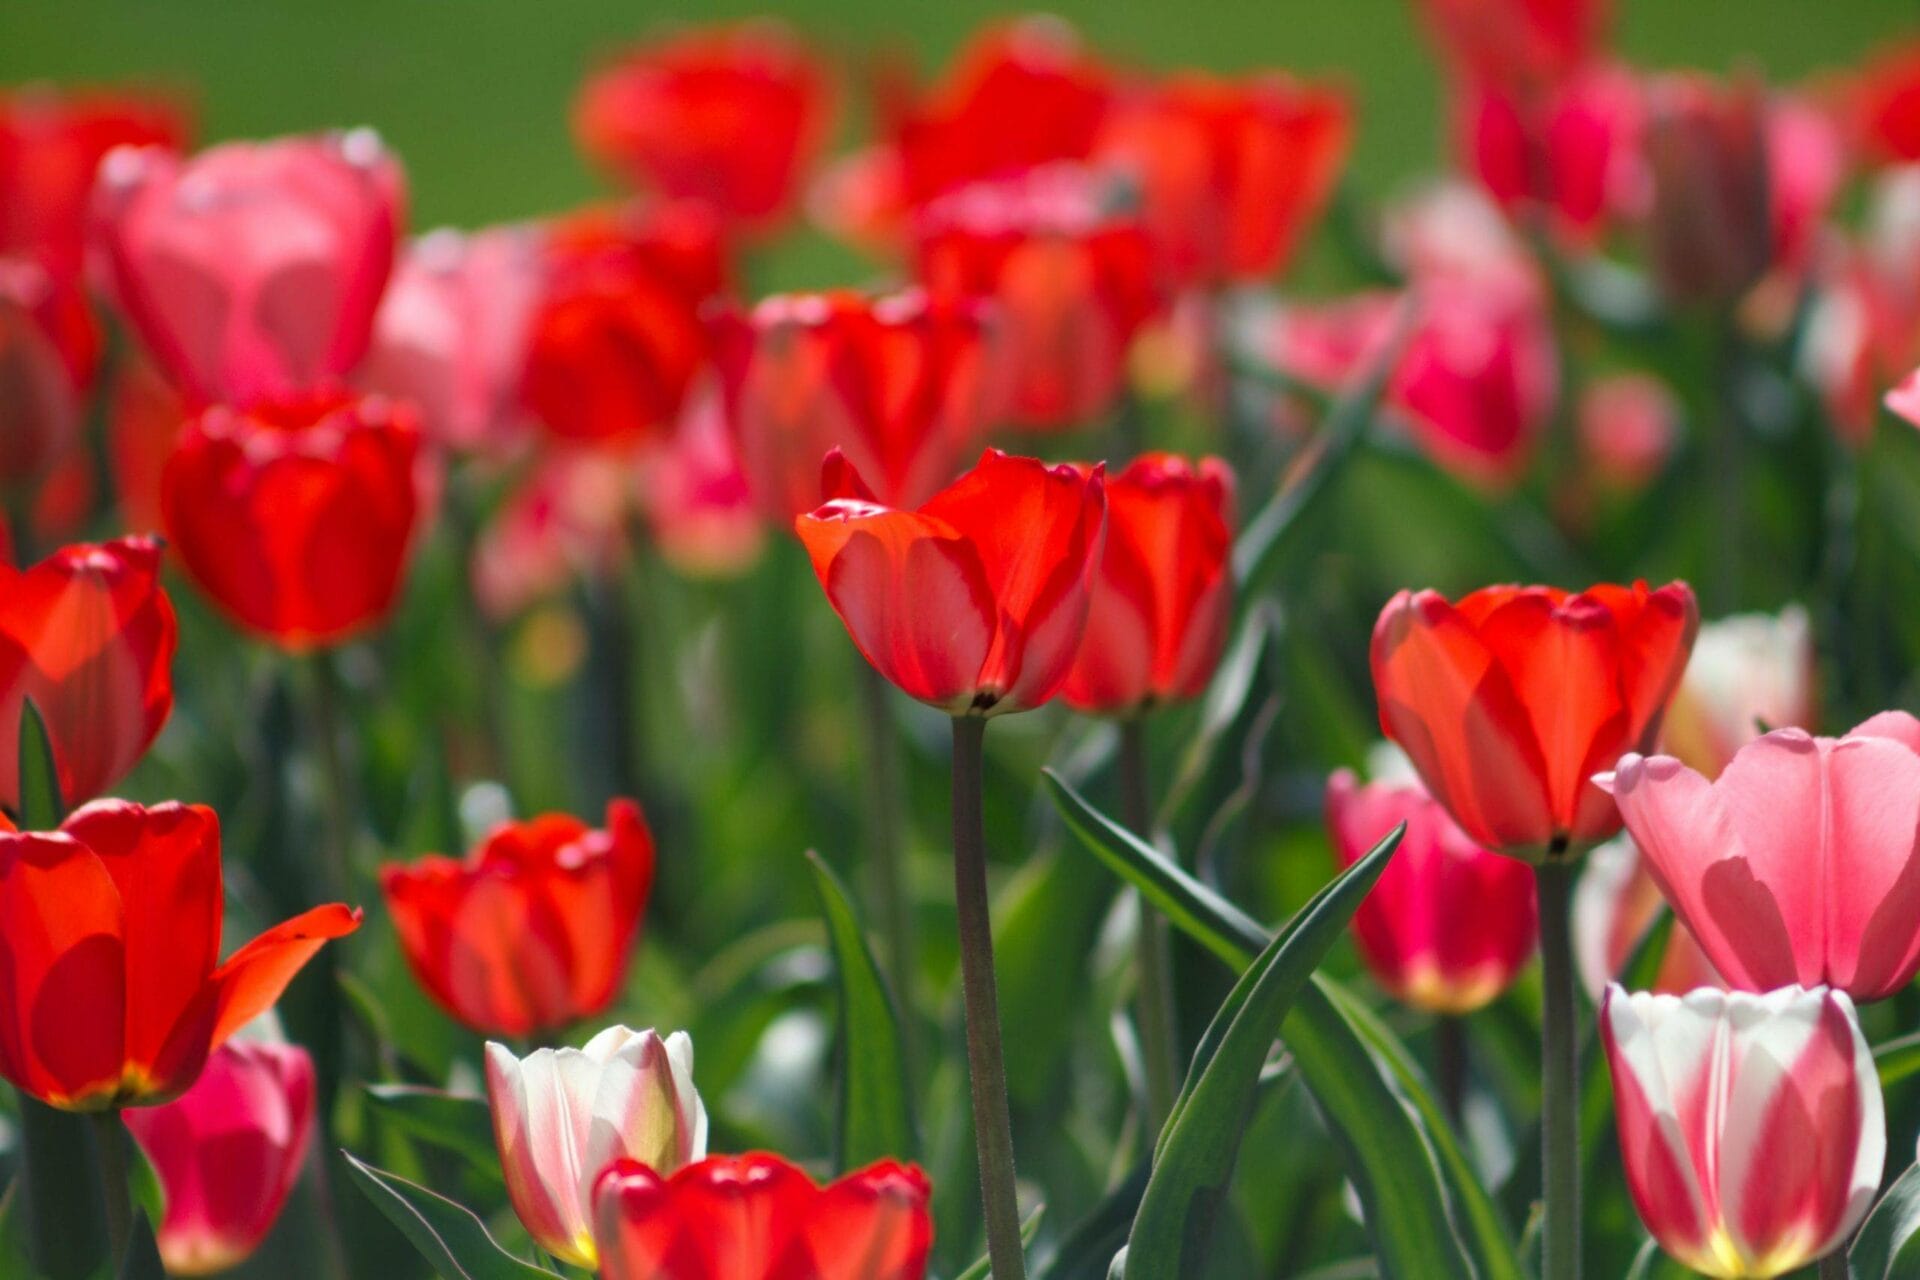 A field of red and white tulips.